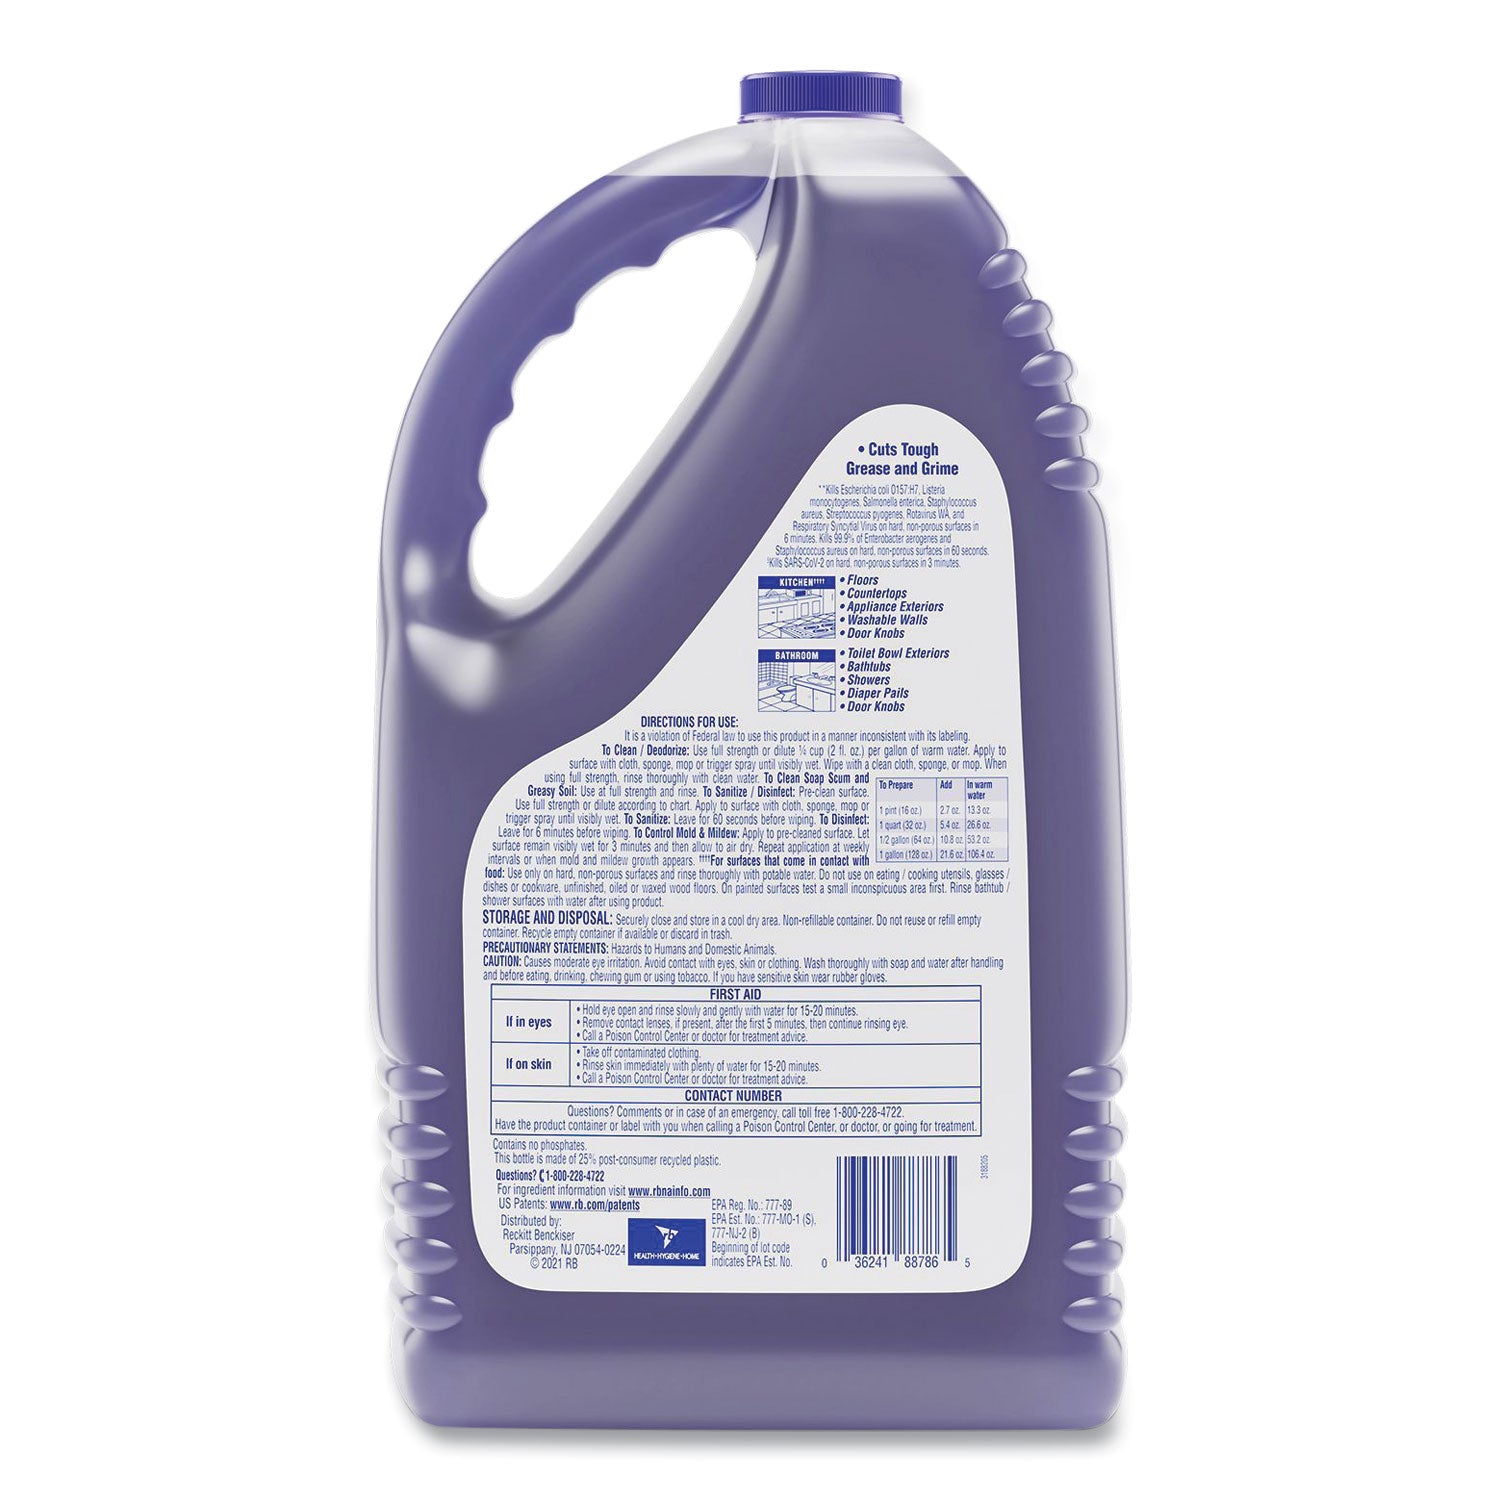 clean-and-fresh-multi-surface-cleaner-lavender-and-orchid-essence-144-oz-bottle-4-carton_rac88786 - 3